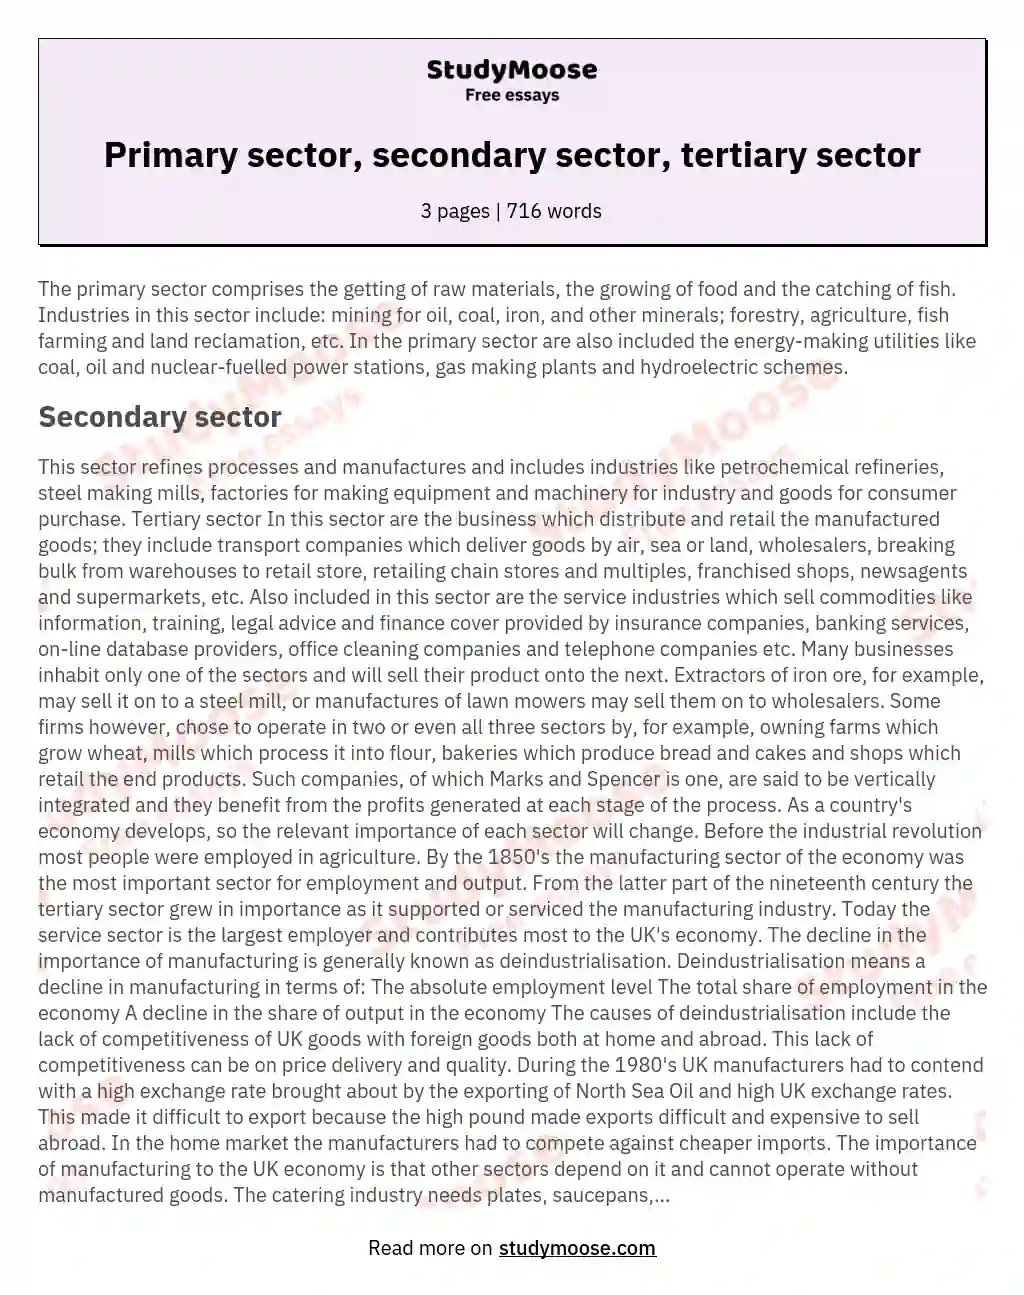 Primary sector, secondary sector, tertiary sector